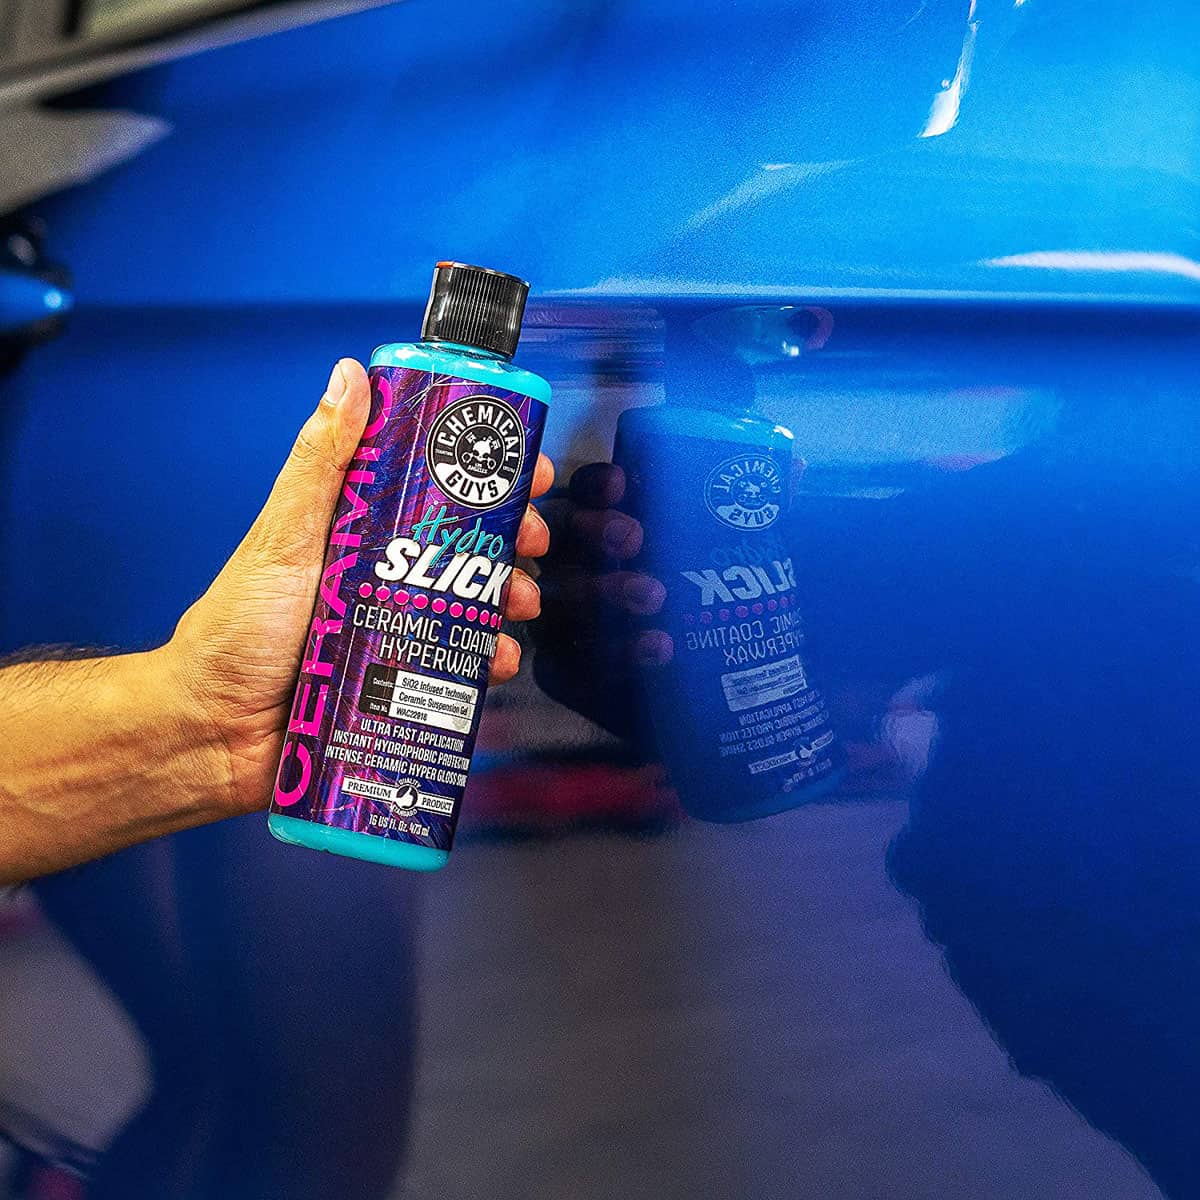 Chemical Guys Hydro Slick Ceramic Coating Hyperwax: Get the deepest shine without wax! Handheld